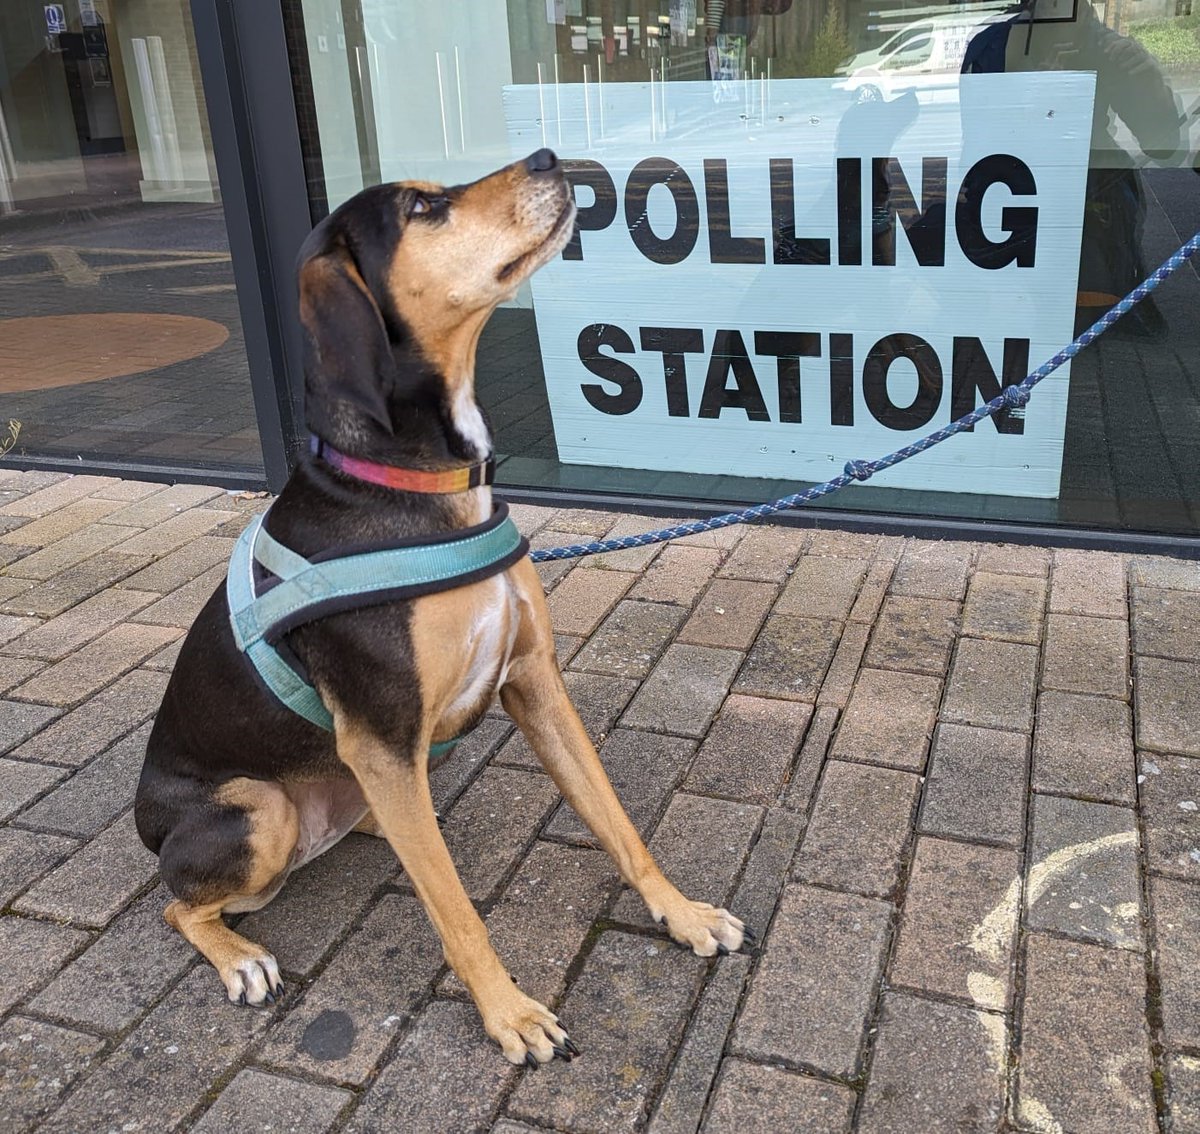 Polling stations are open for the Avon and Somerset Police and Crime Commissioner election and New Cheltenham by-election (where applicable). Your polling station should be printed on your polling card and don’t forget to take voter ID with you. More info:orlo.uk/Voter_ID_fWPLe